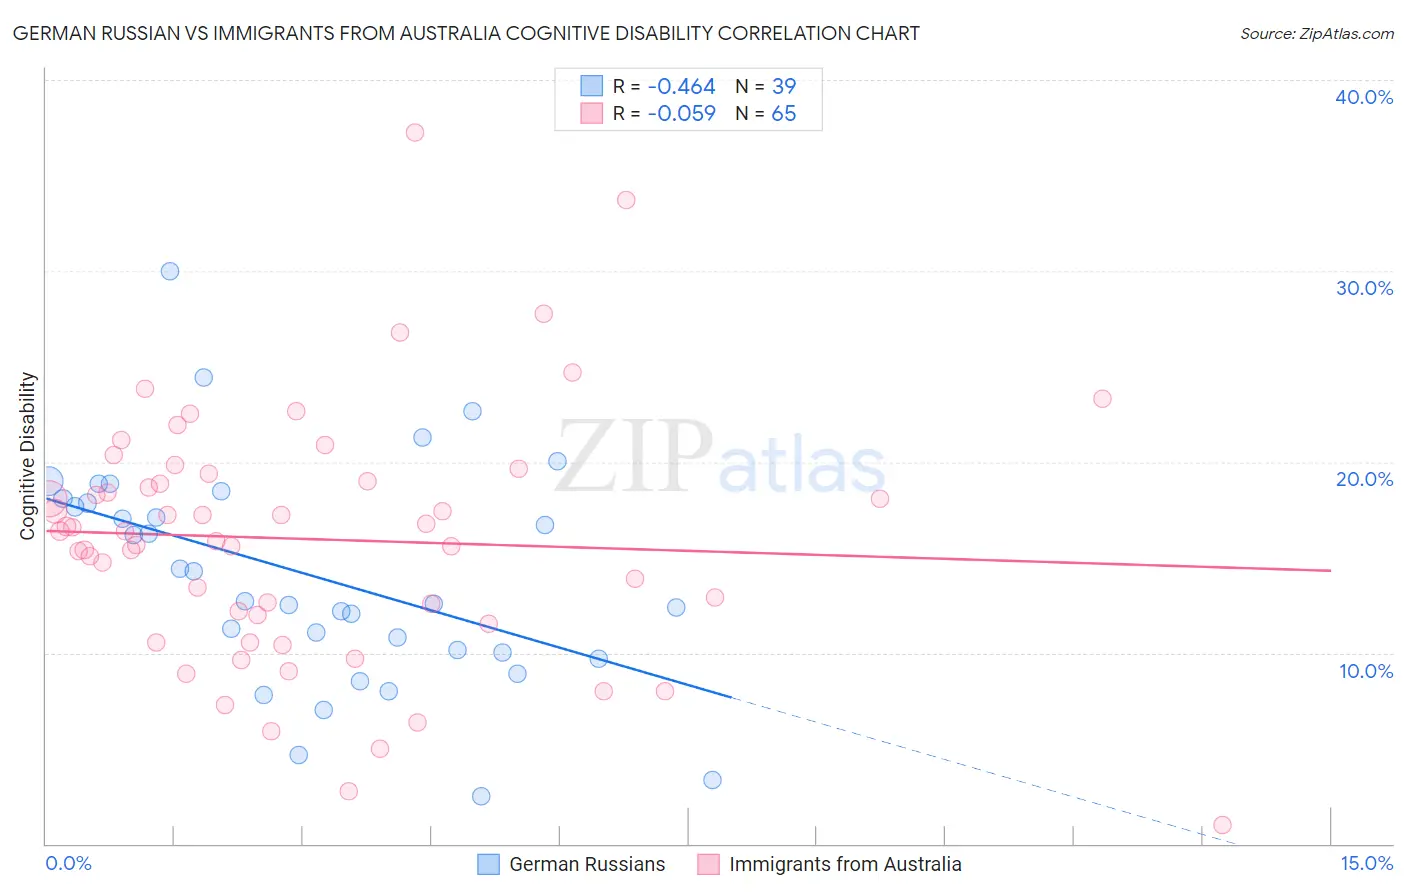 German Russian vs Immigrants from Australia Cognitive Disability